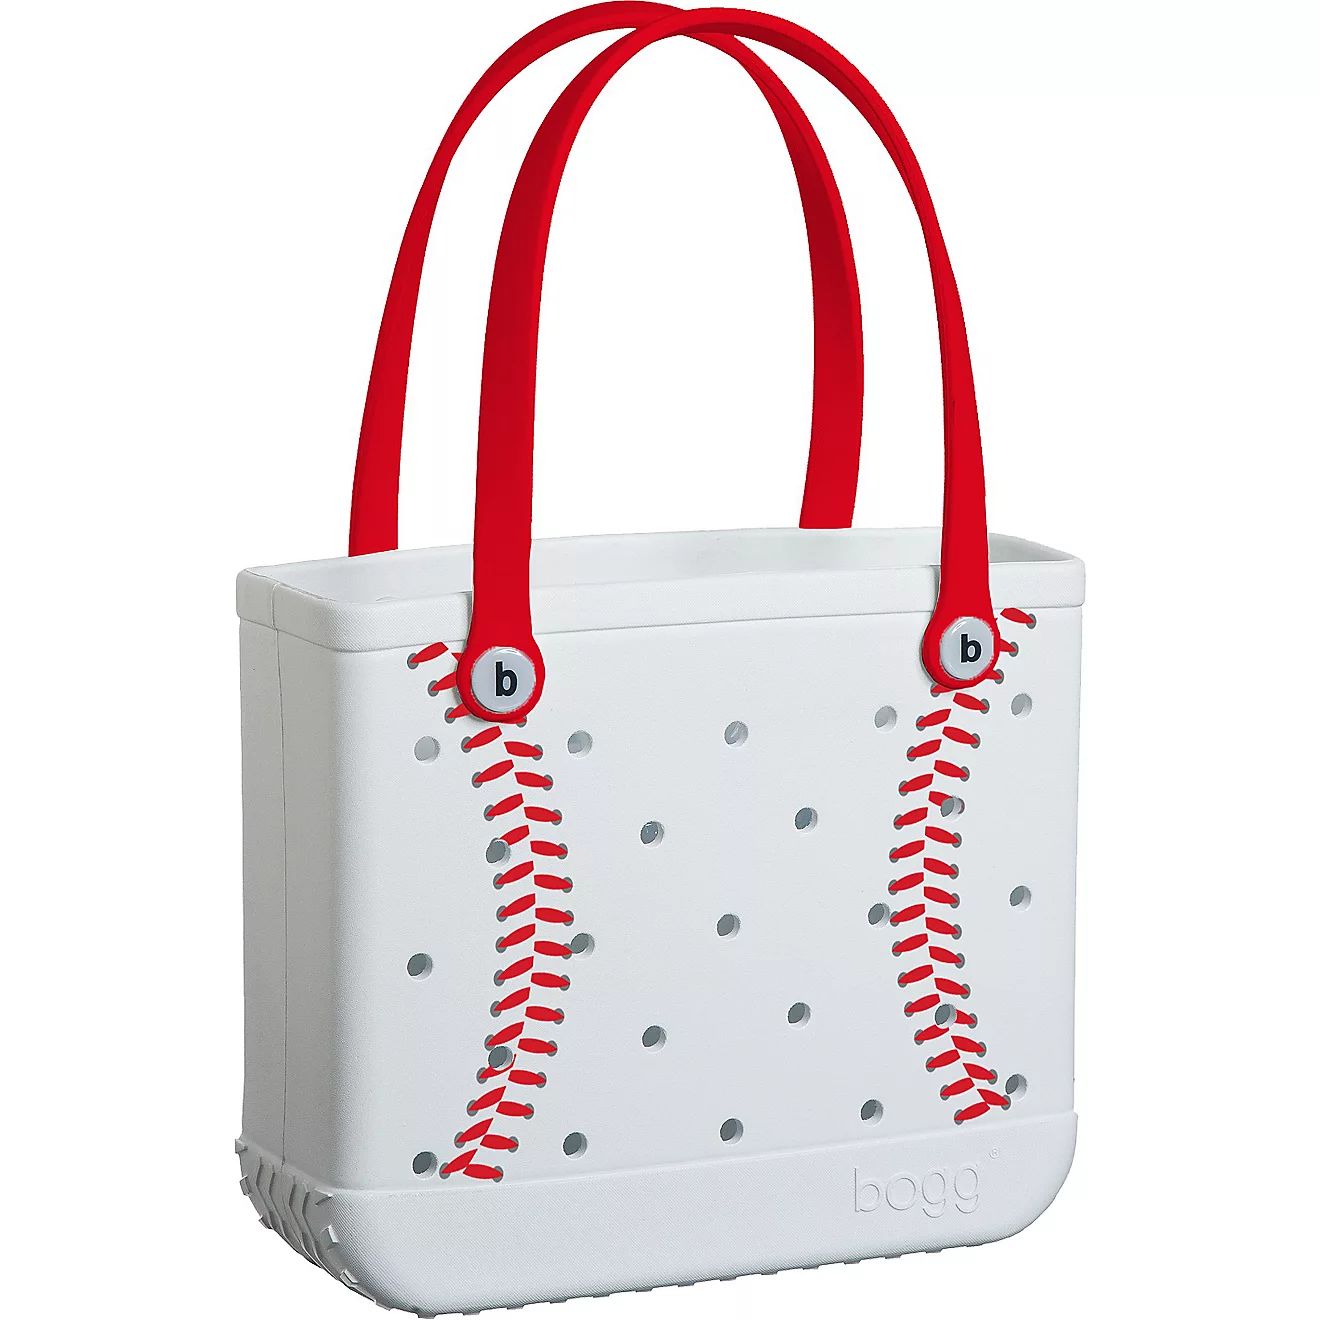 Bogg Bag Baby Homerun Tote Bag | Free Shipping at Academy | Academy Sports + Outdoors